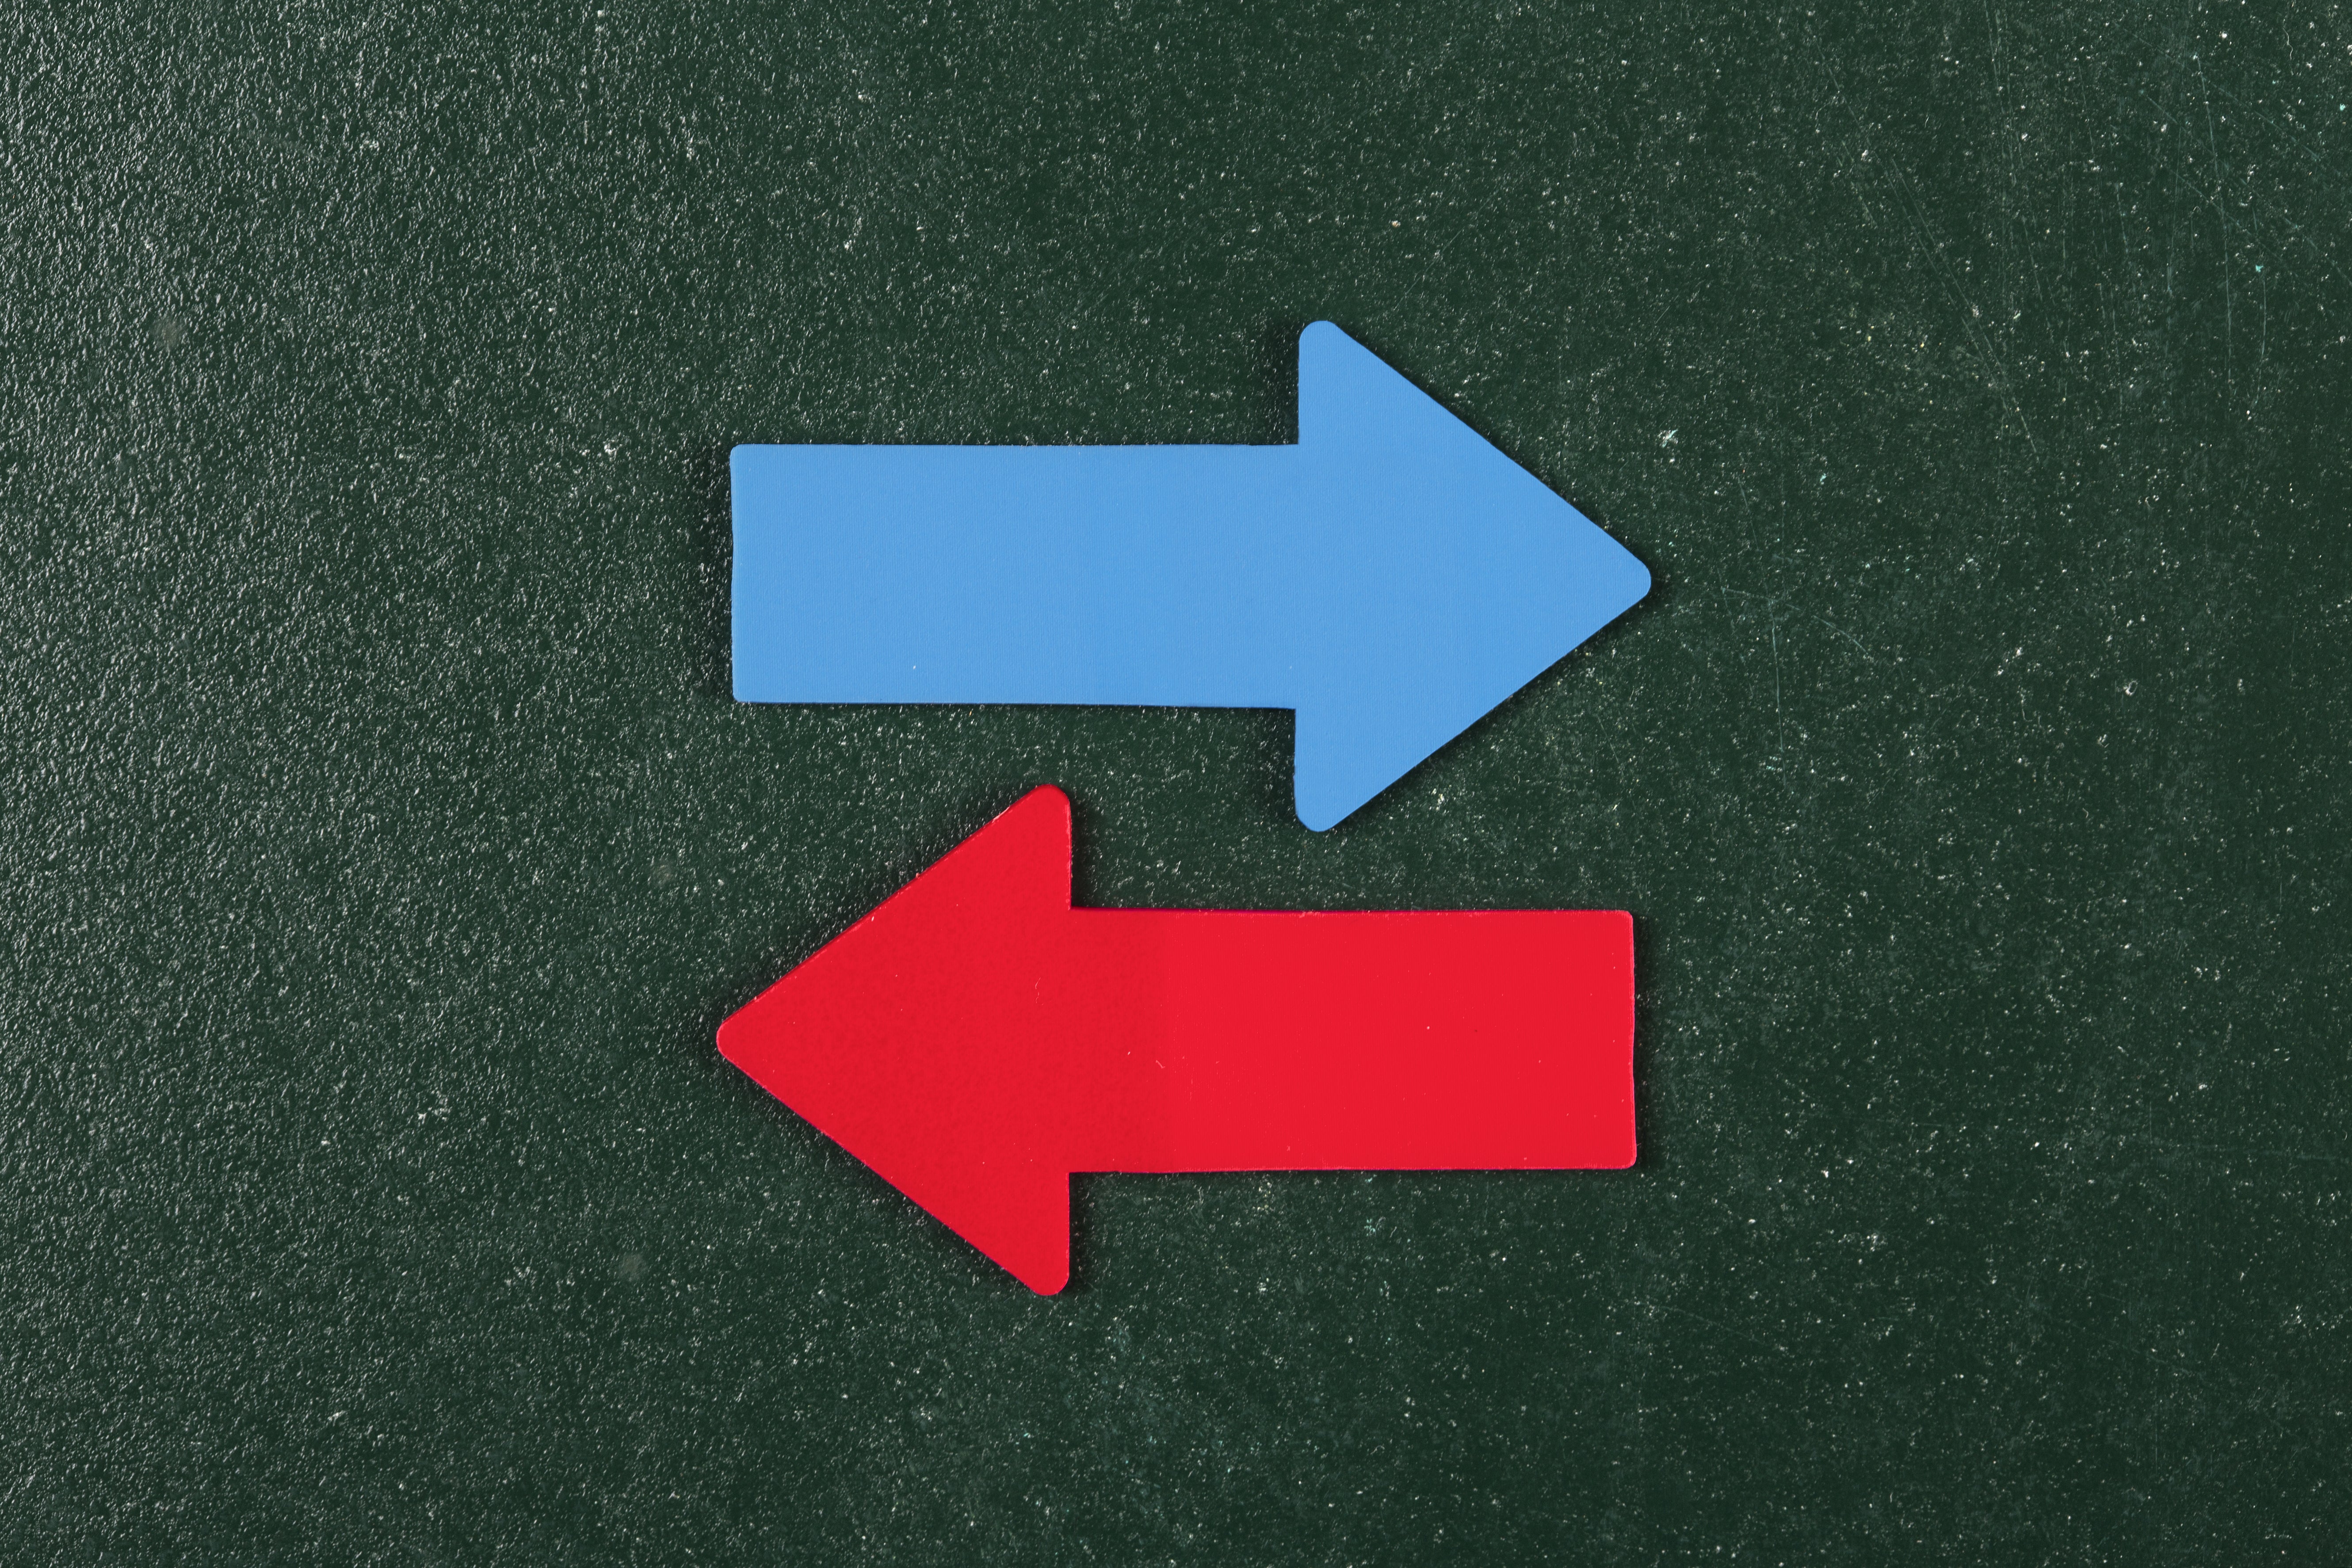 A blue arrow pointing towards the right and a red arrow pointing towards the left. 